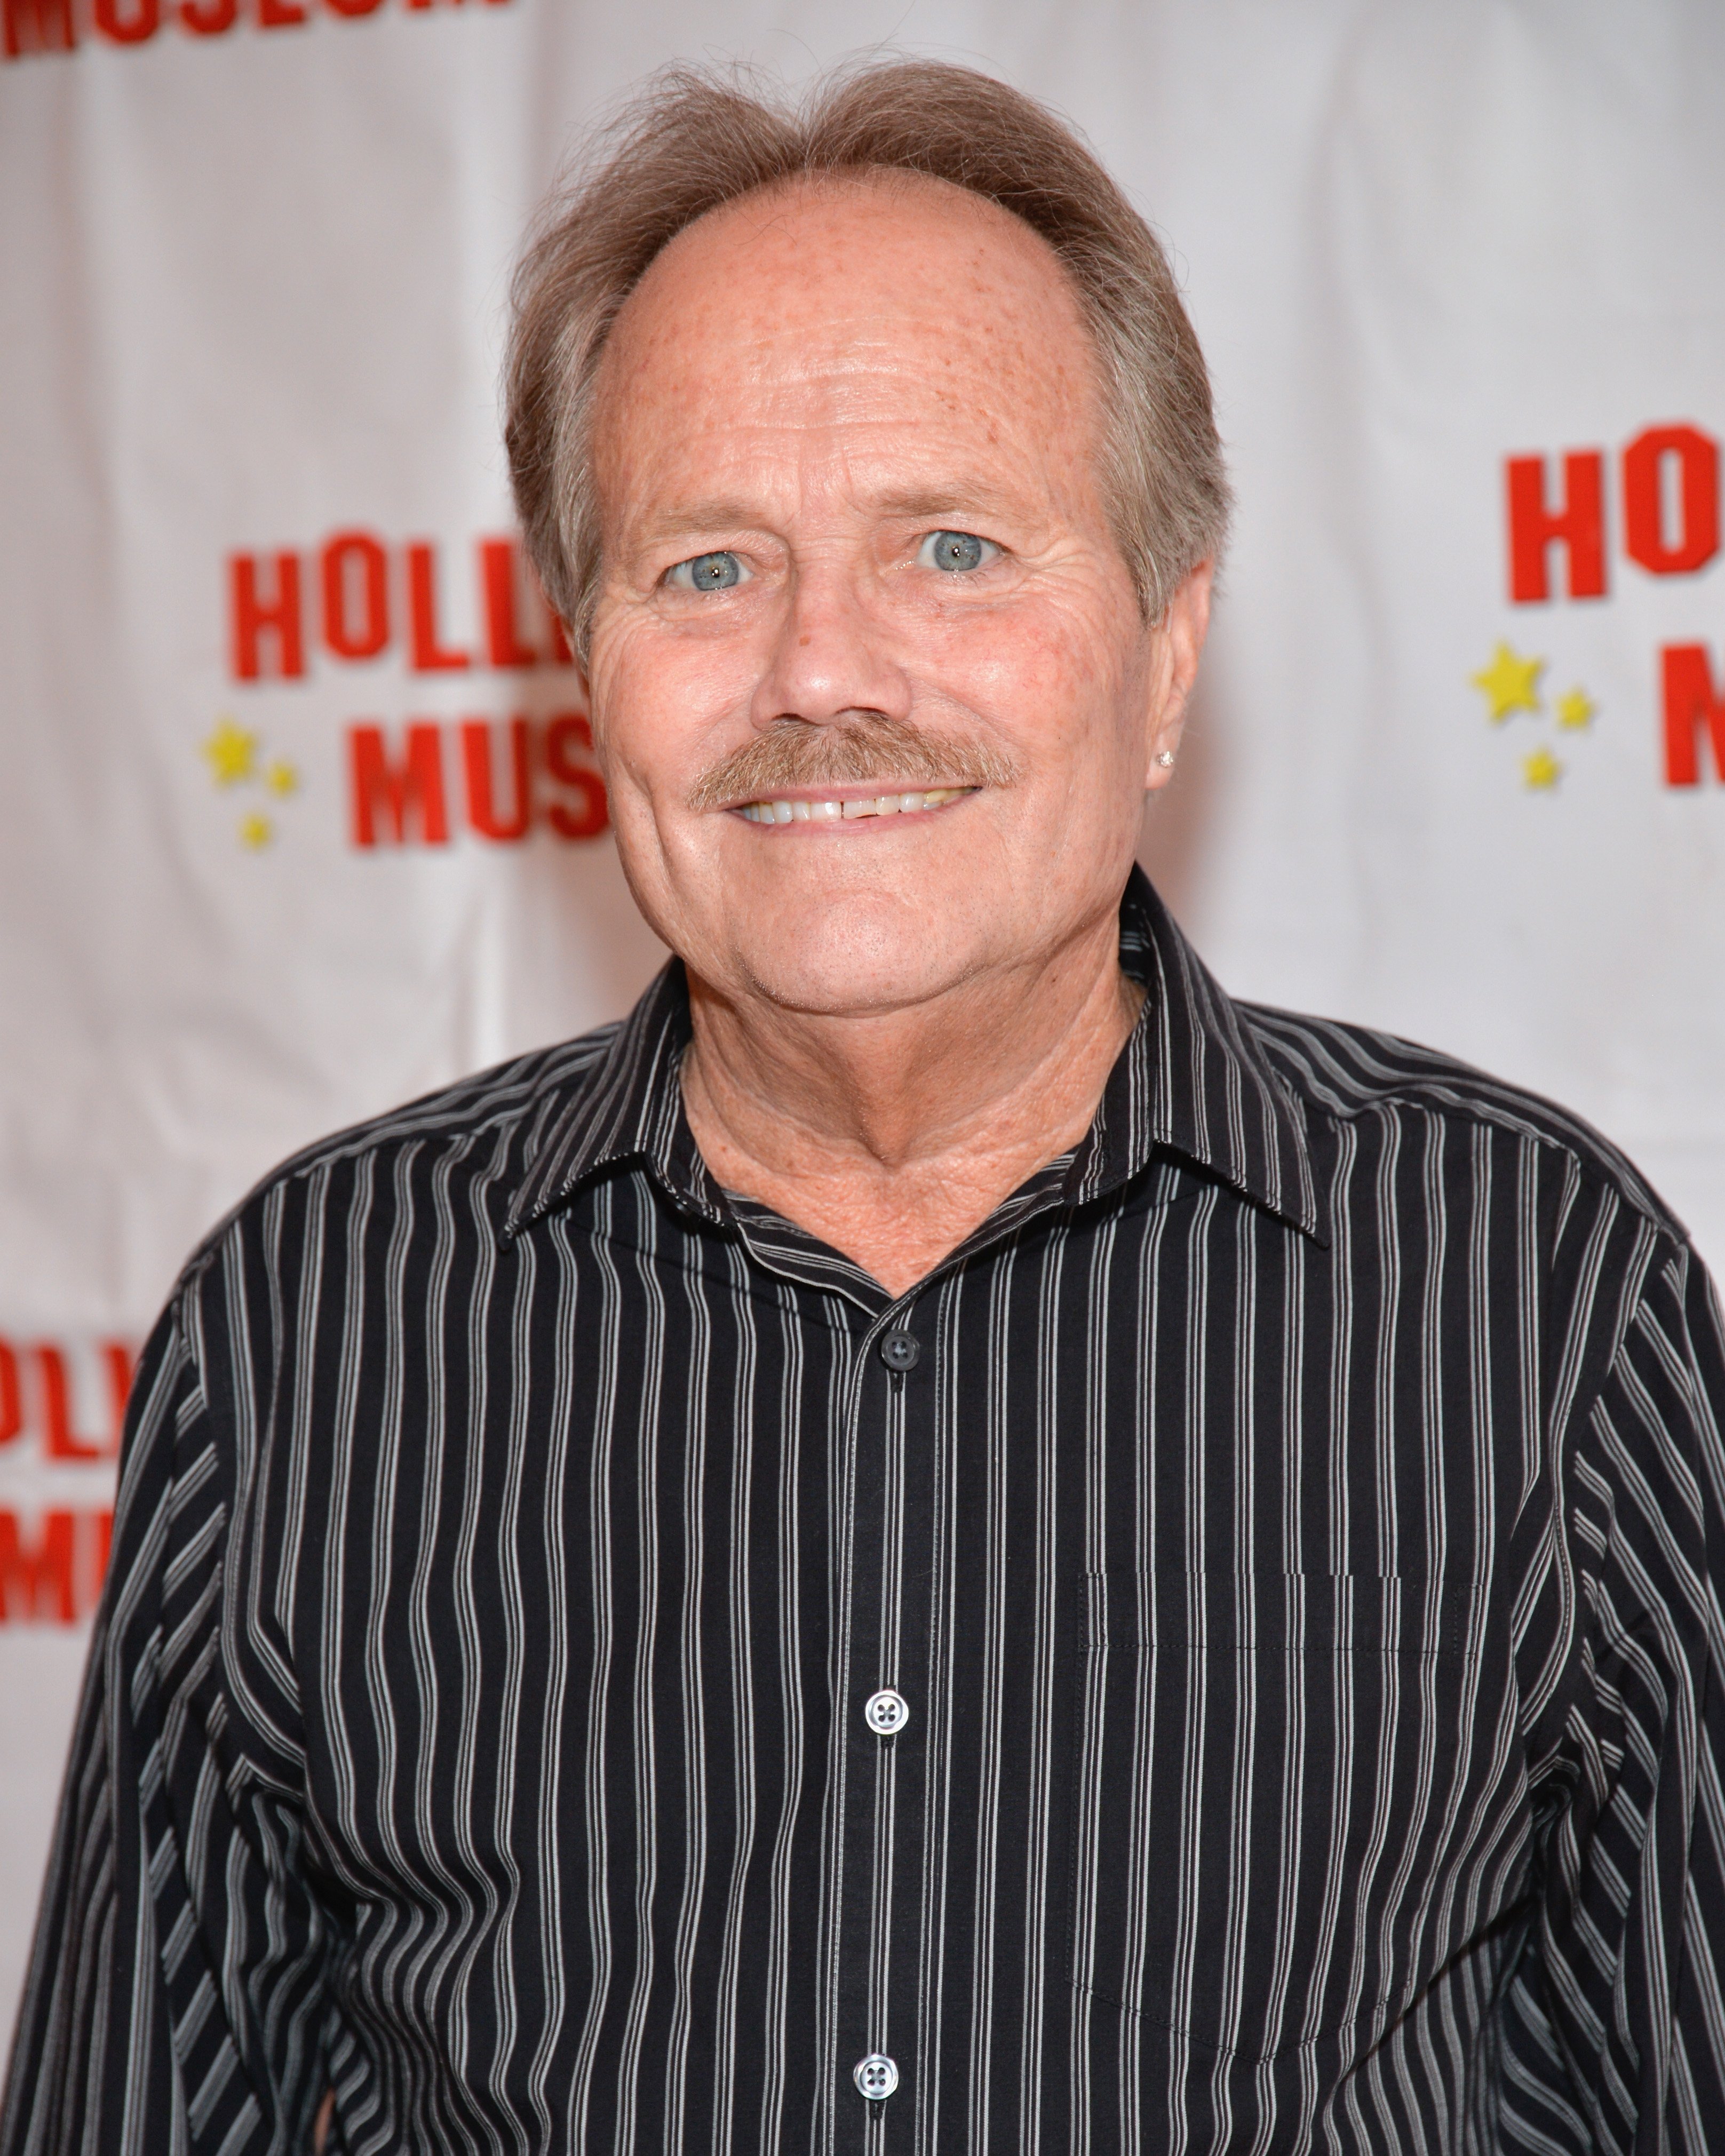 Jon Provost attends a preview of The Hollywood Museum's "Child Stars - Then And Now" exhibit at The Hollywood Museum on August 18, 2016 | Source: 